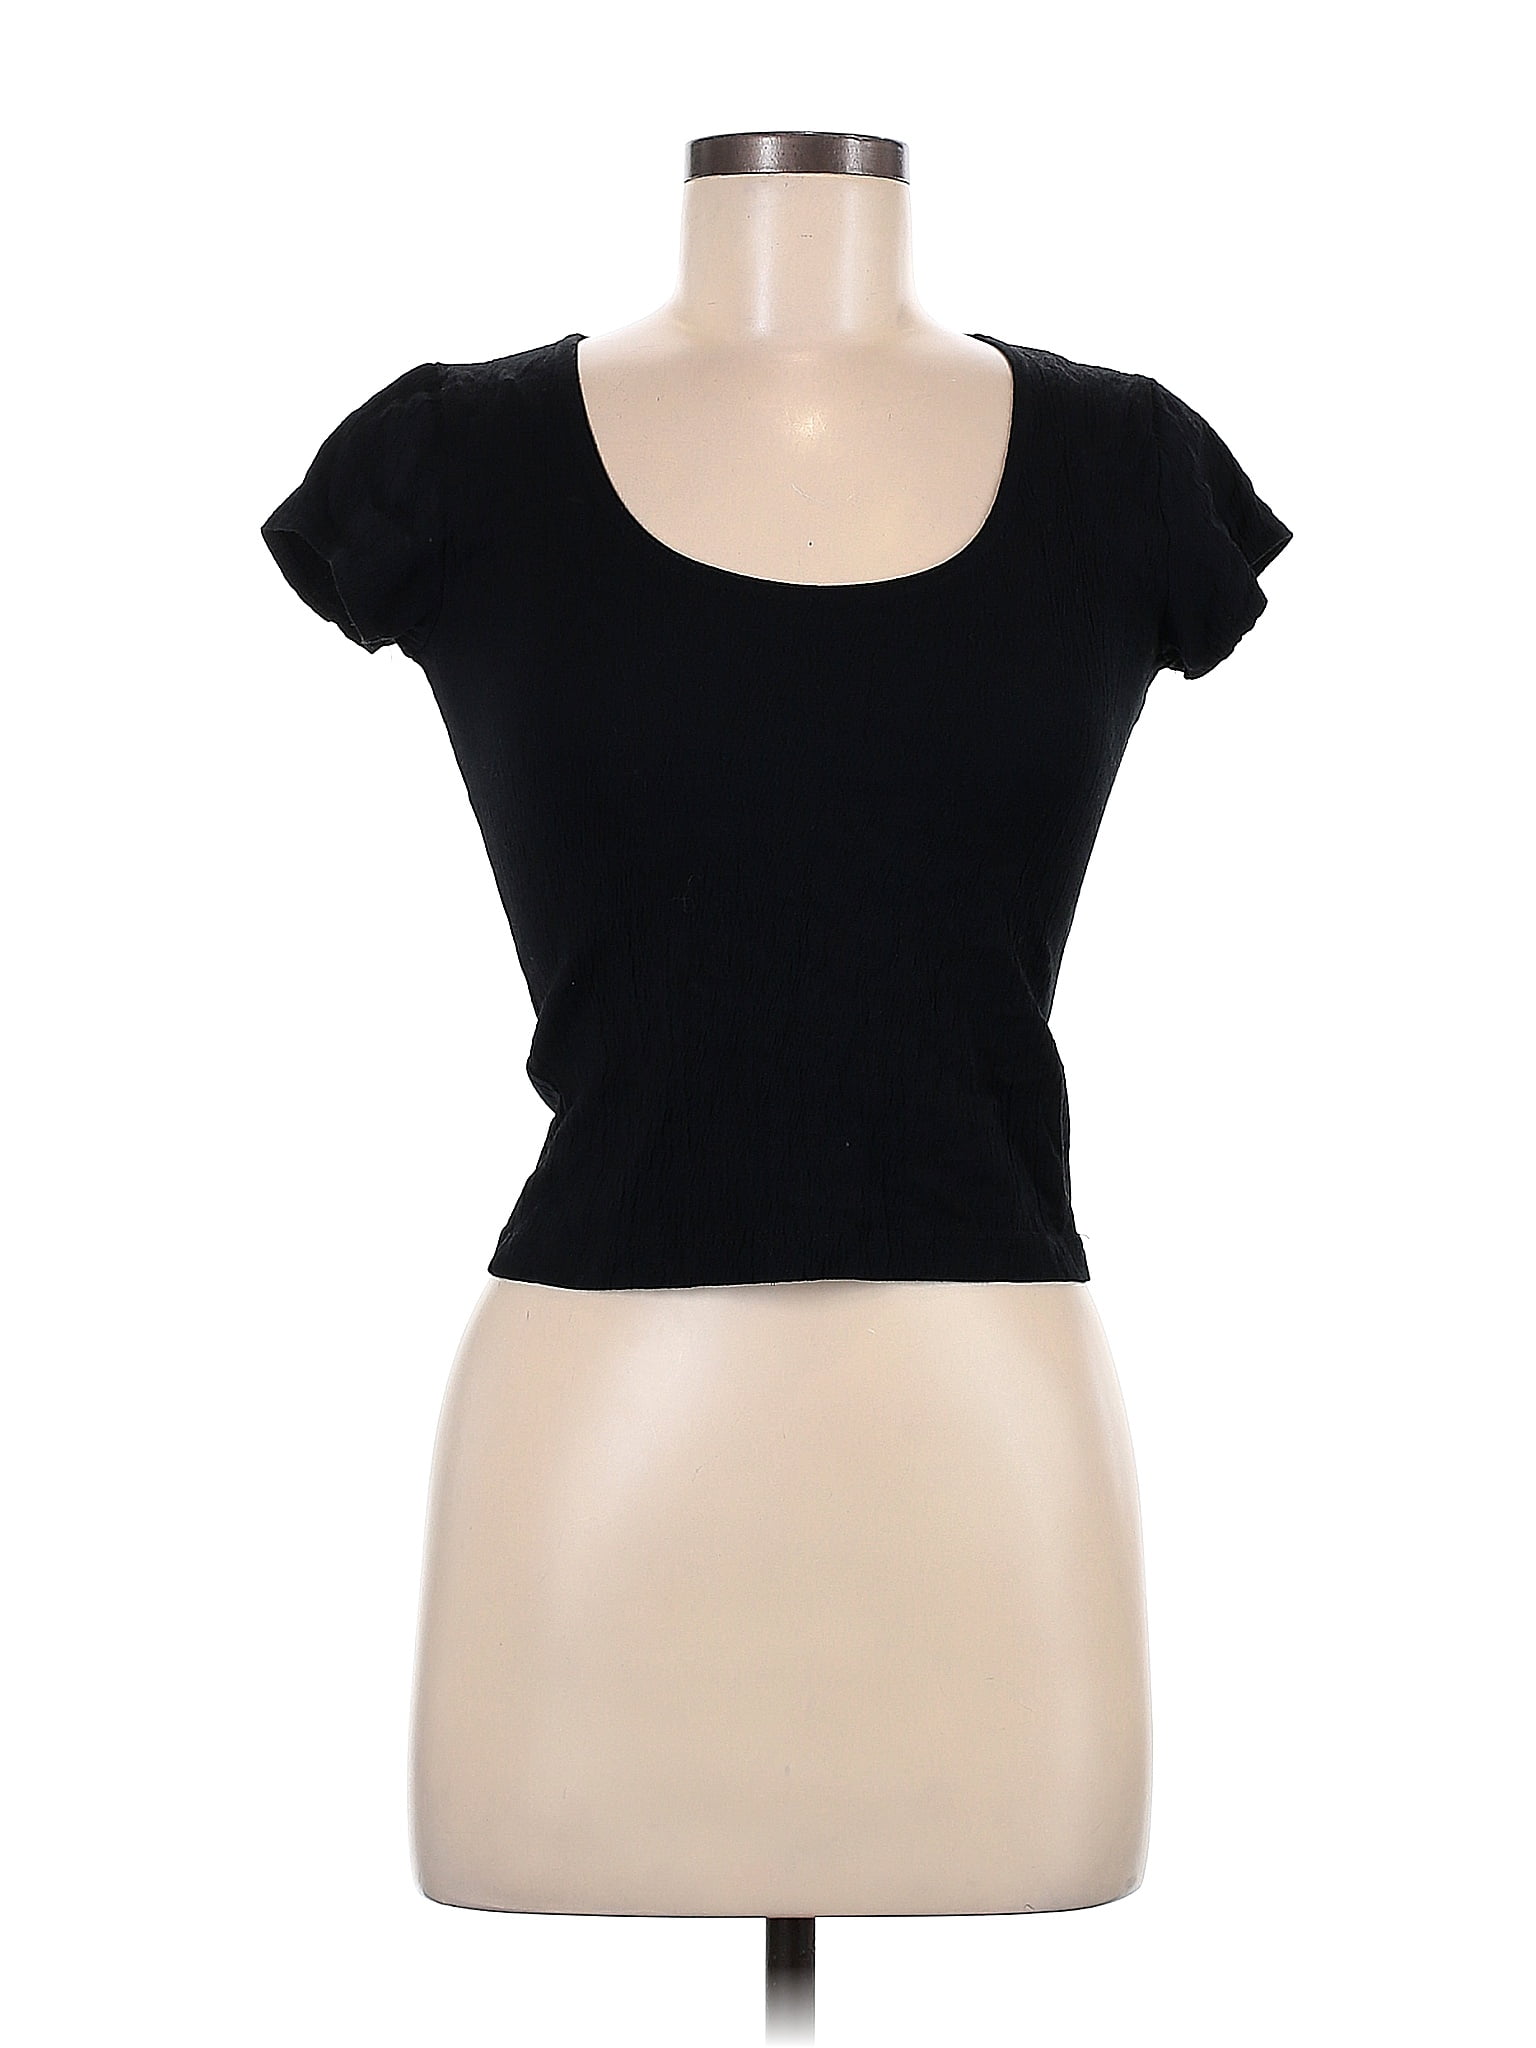 Brandy Melville Solid Black Short Sleeve Top One Size - 52% off